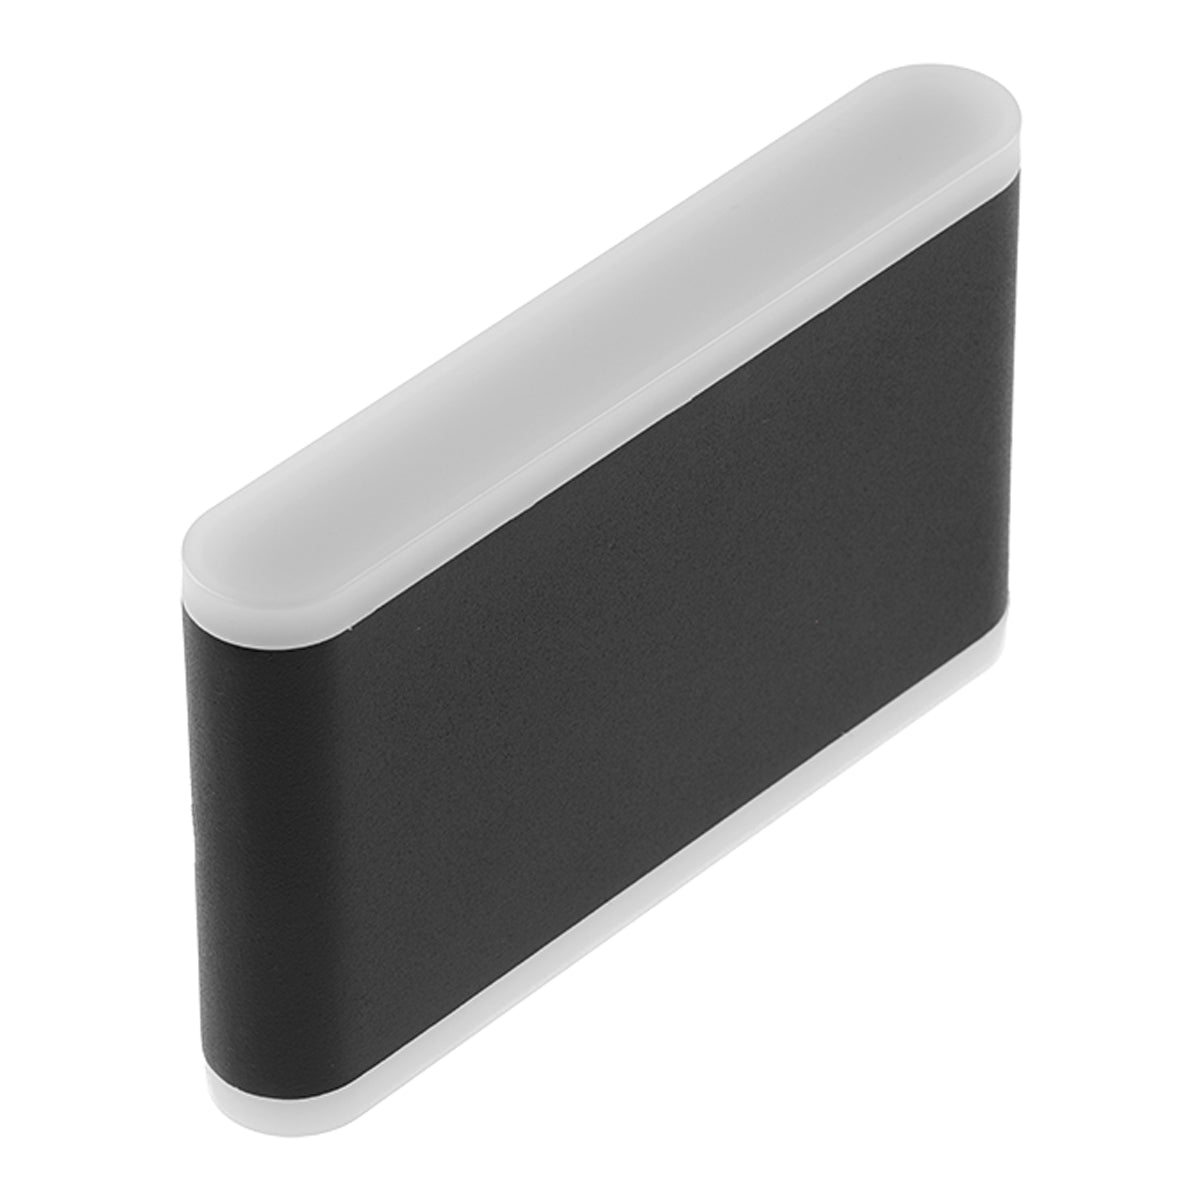 Our Emilia black aluminium outdoor wall mounted rectangle outdoor light with built in LED's would look perfect in a modern or more traditional home design. Outside wall lights can provide atmospheric light in your garden, at the front door or on the terrace as well as a great security solution. It is designed for durability and longevity with its robust material producing a fully weatherproof and water resistant light fitting.